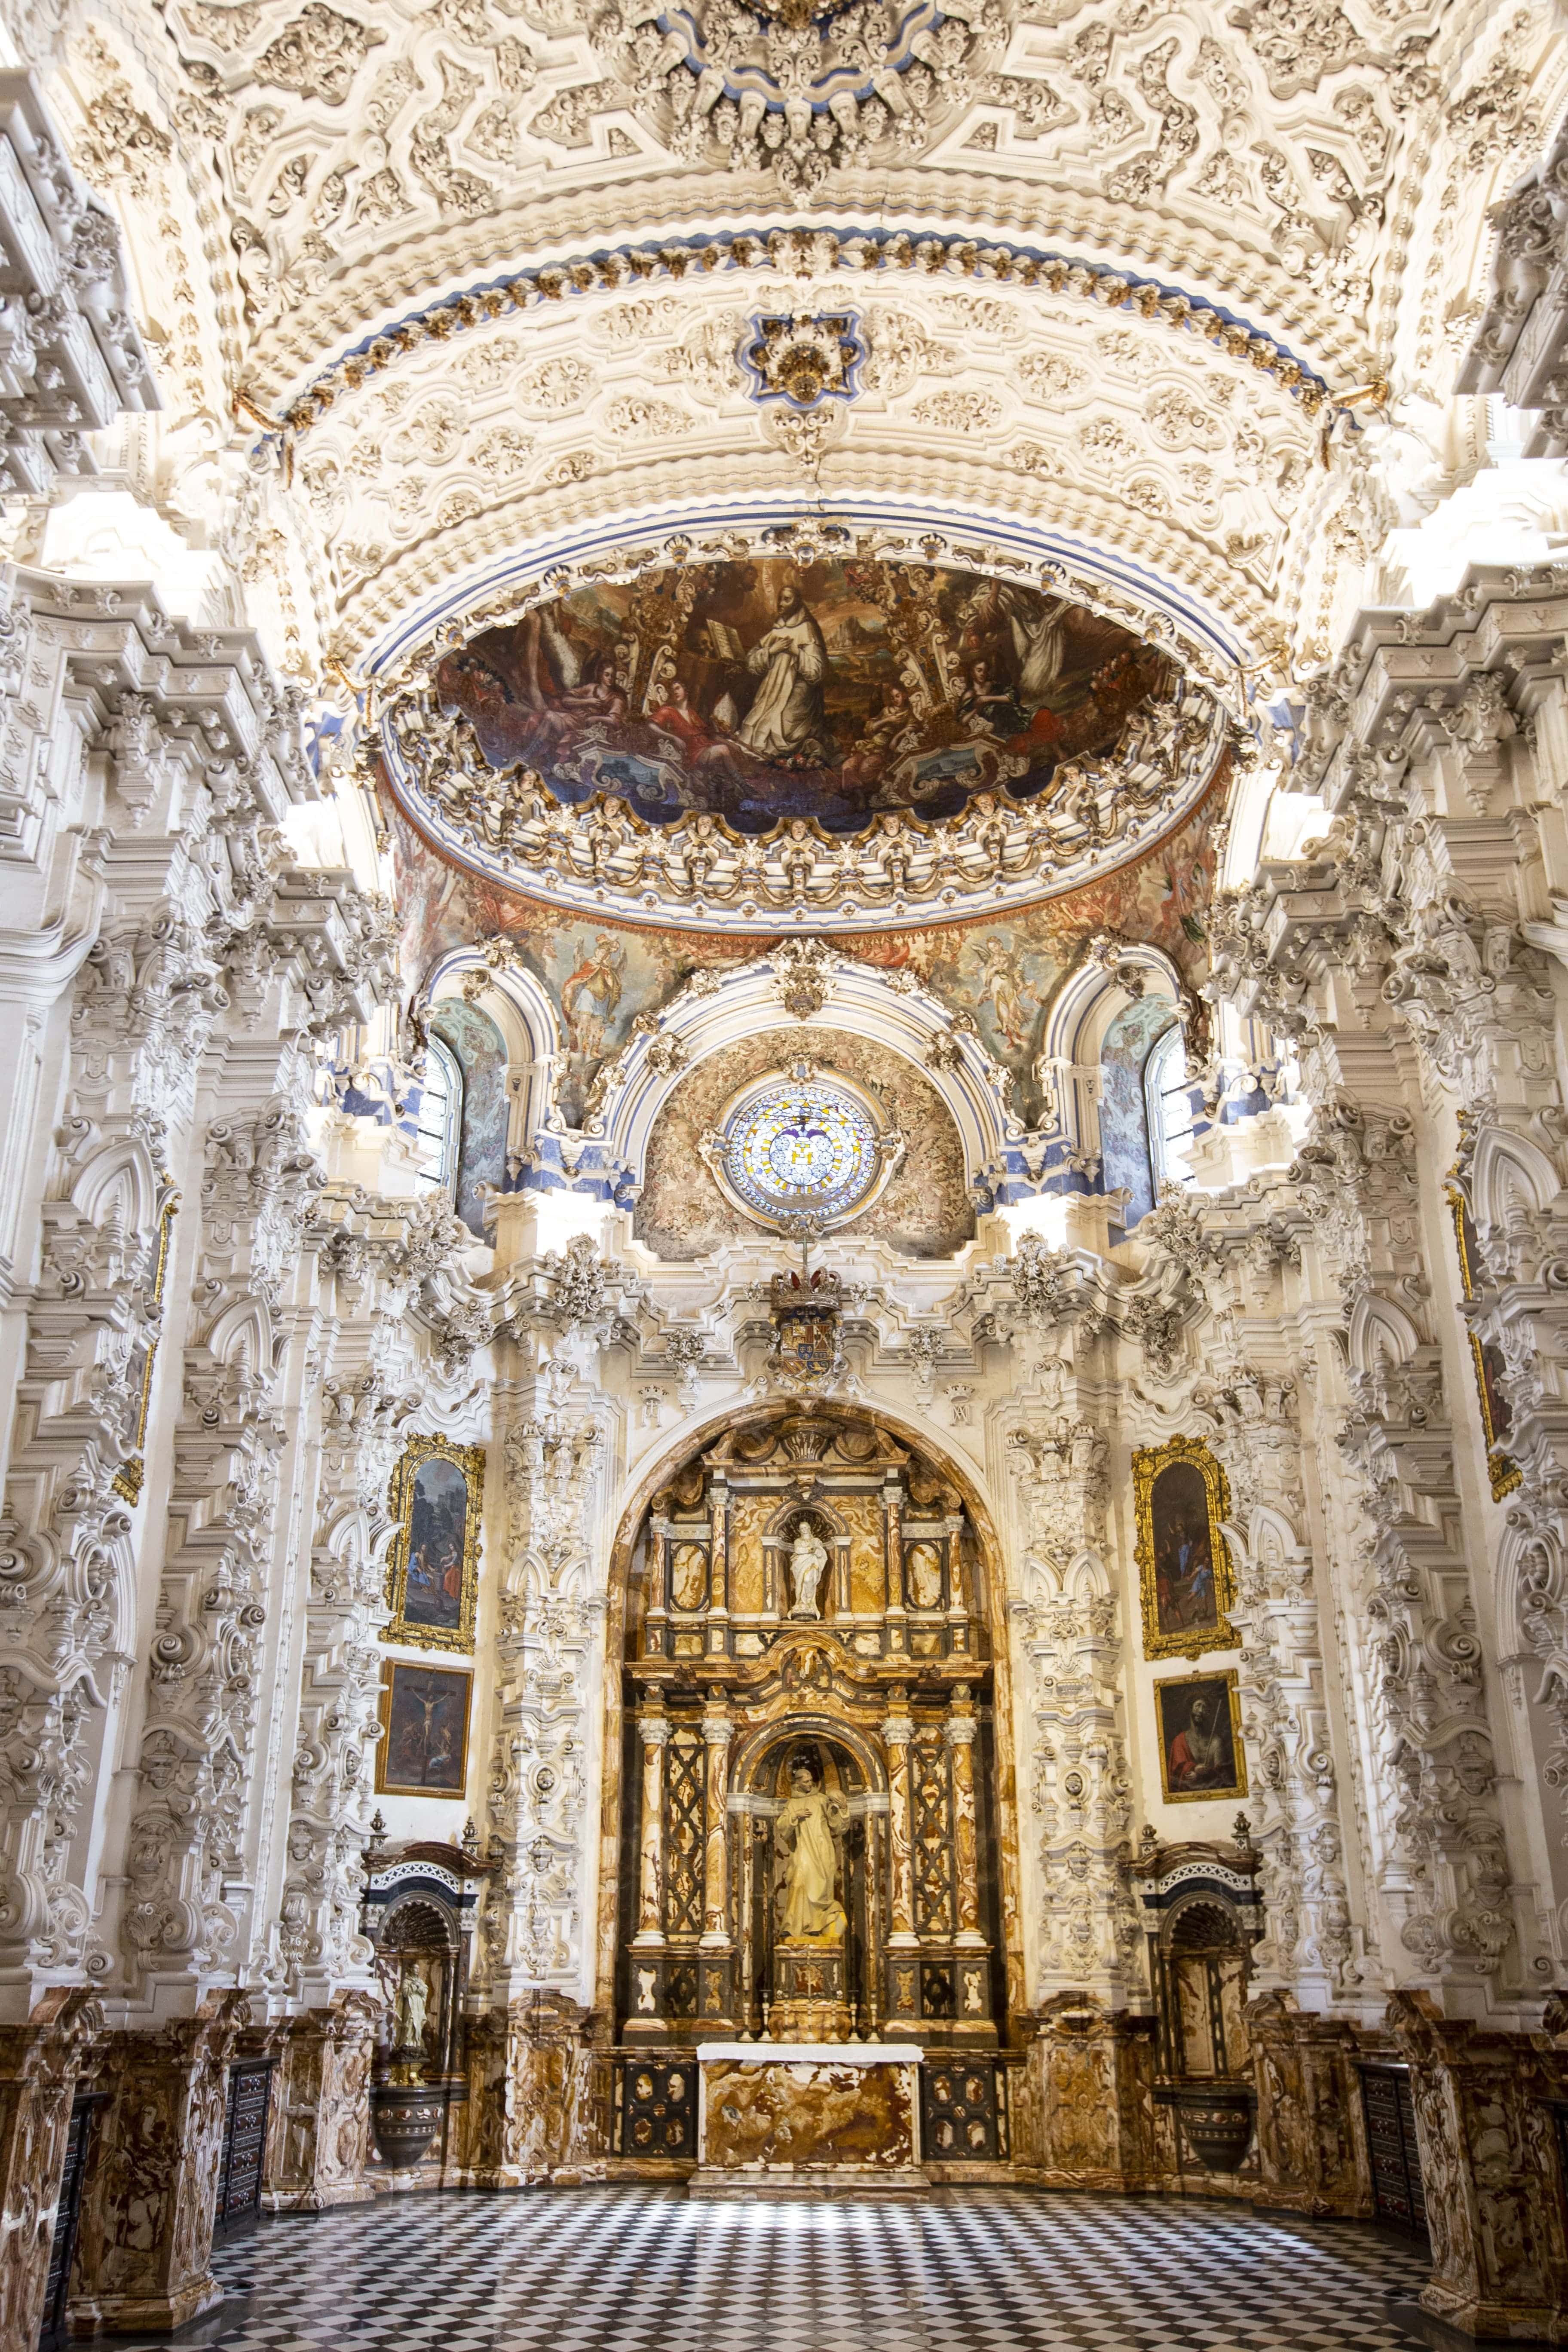 Buy tickets online for the Carthusian Monastery in Granada